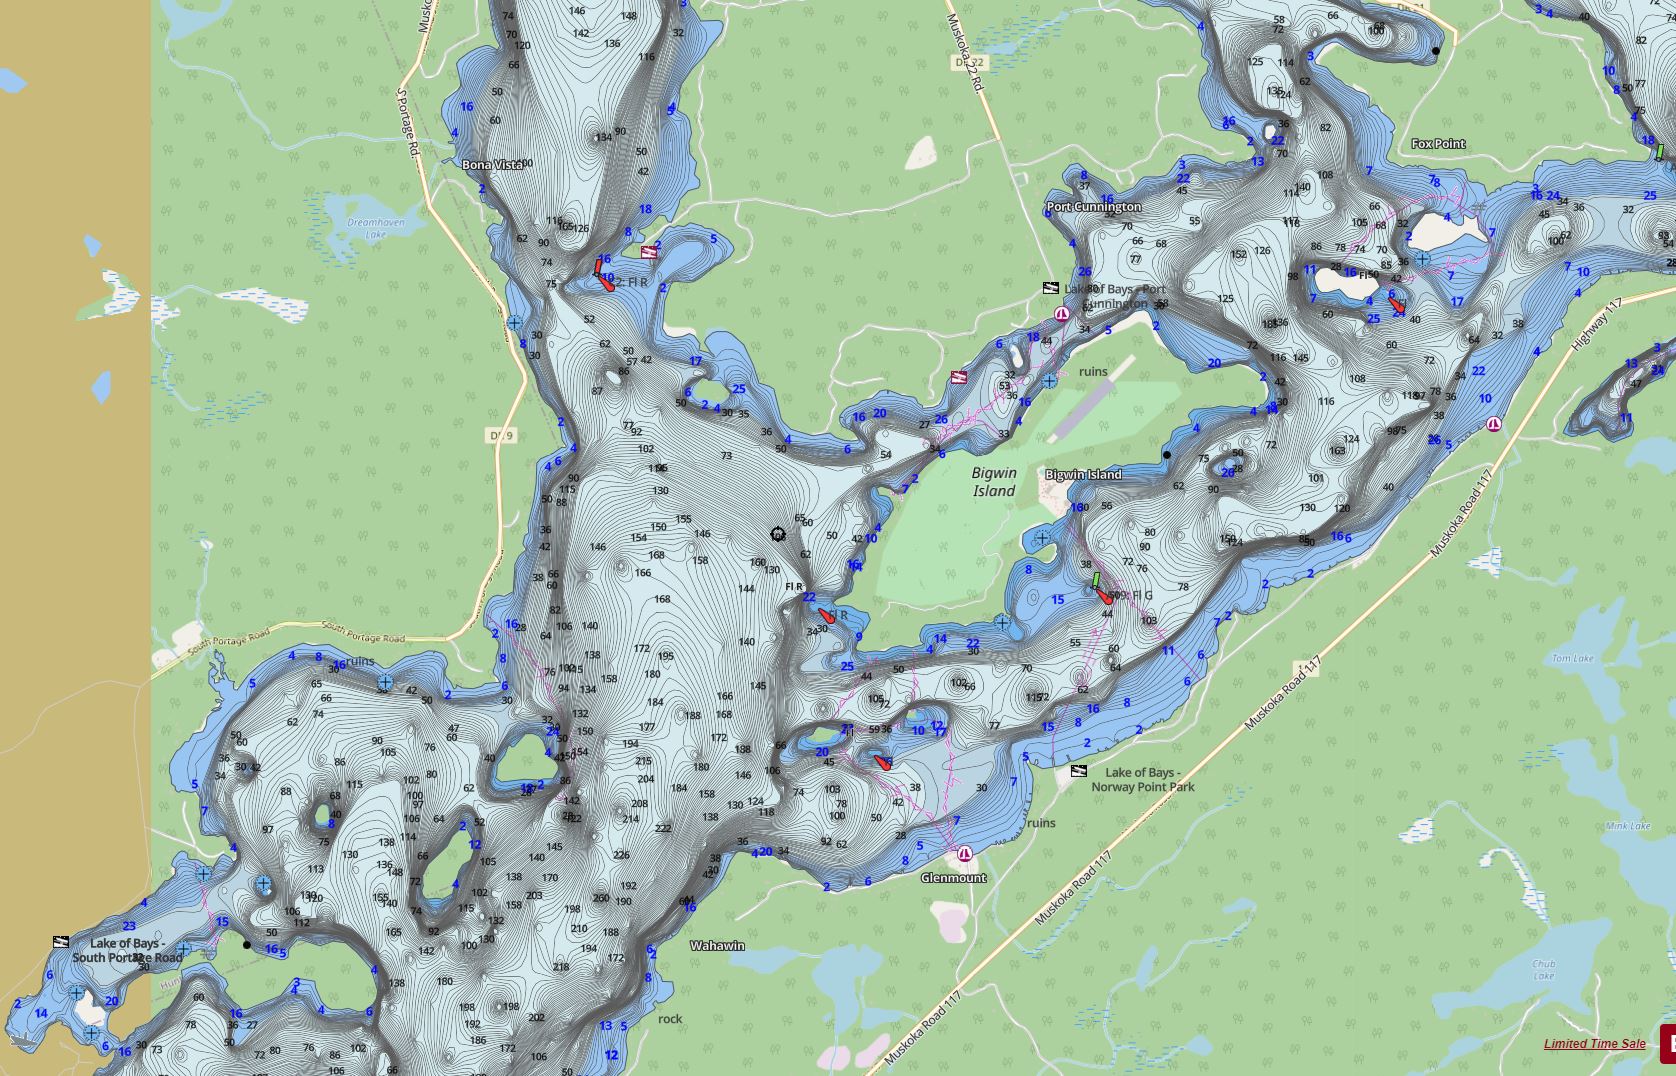 Contour Map of Lake Of Bays in Municipality of Lake of Bays and the District of Muskoka